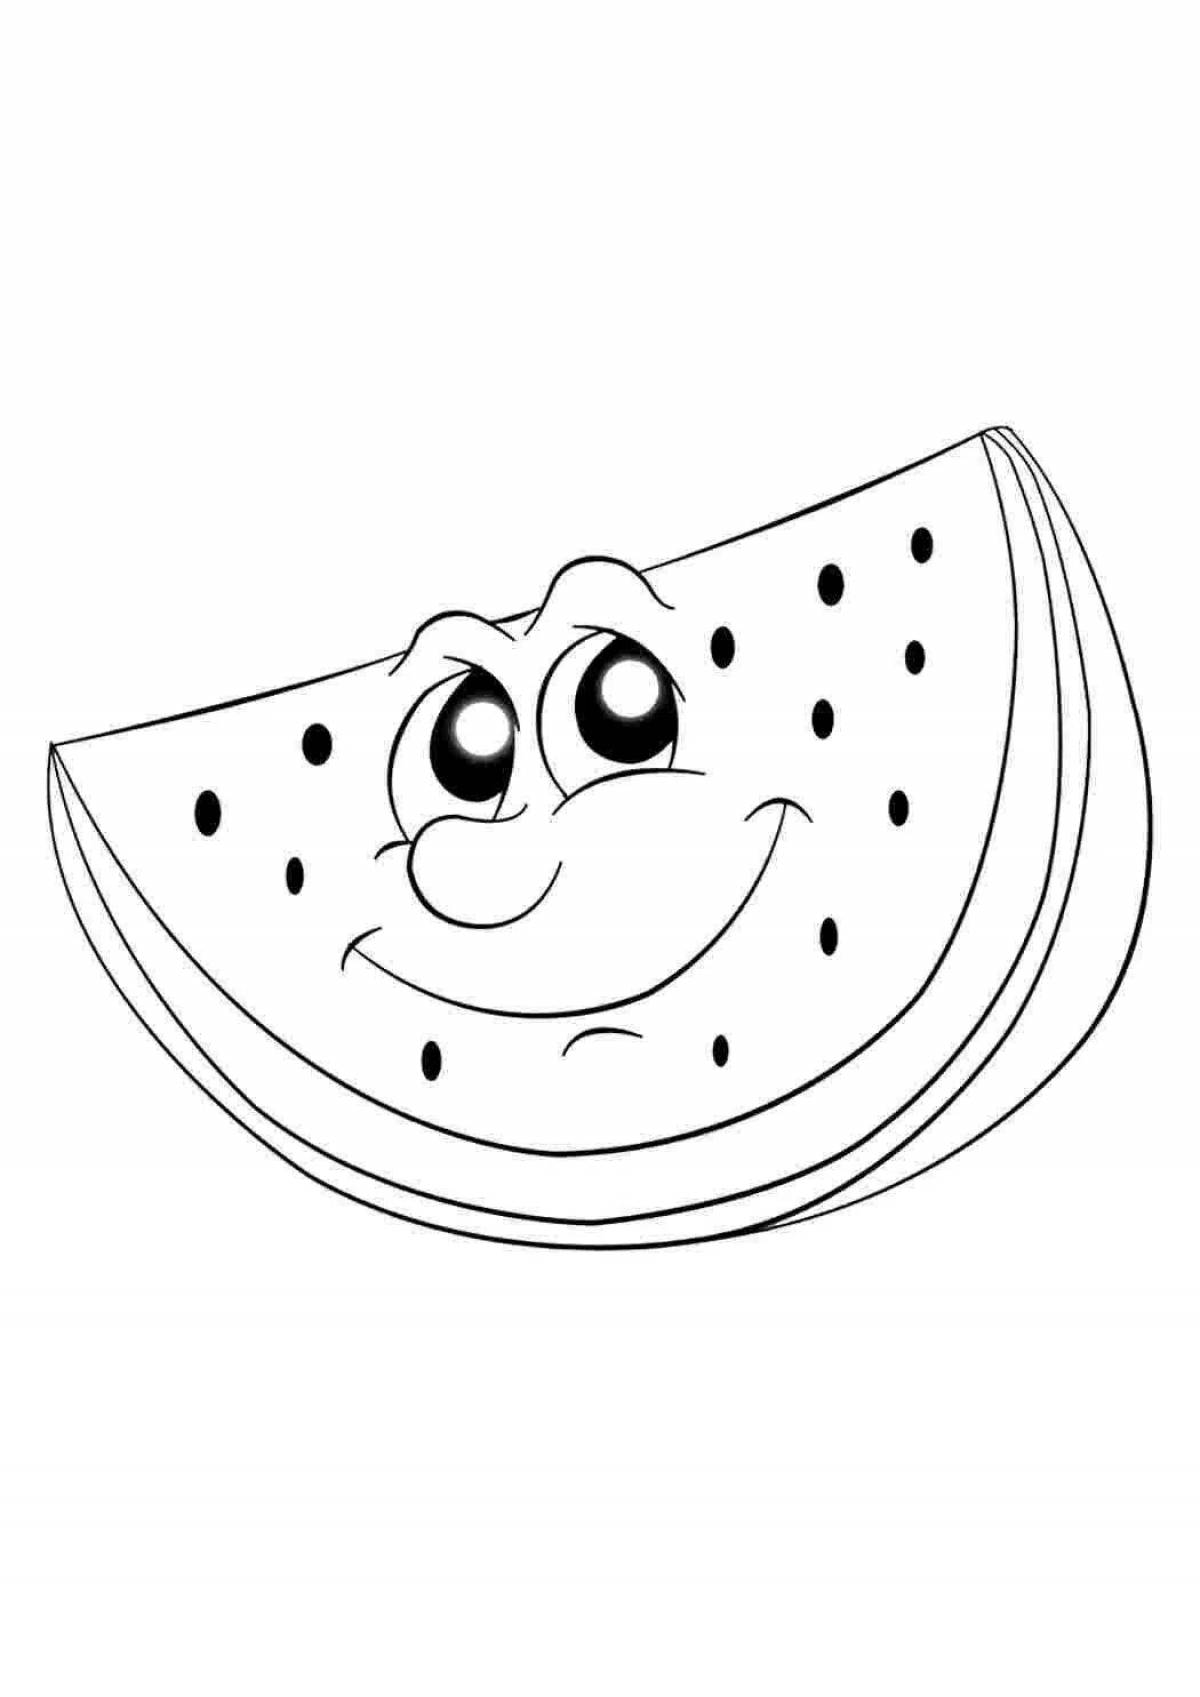 Tempting watermelon slice coloring page